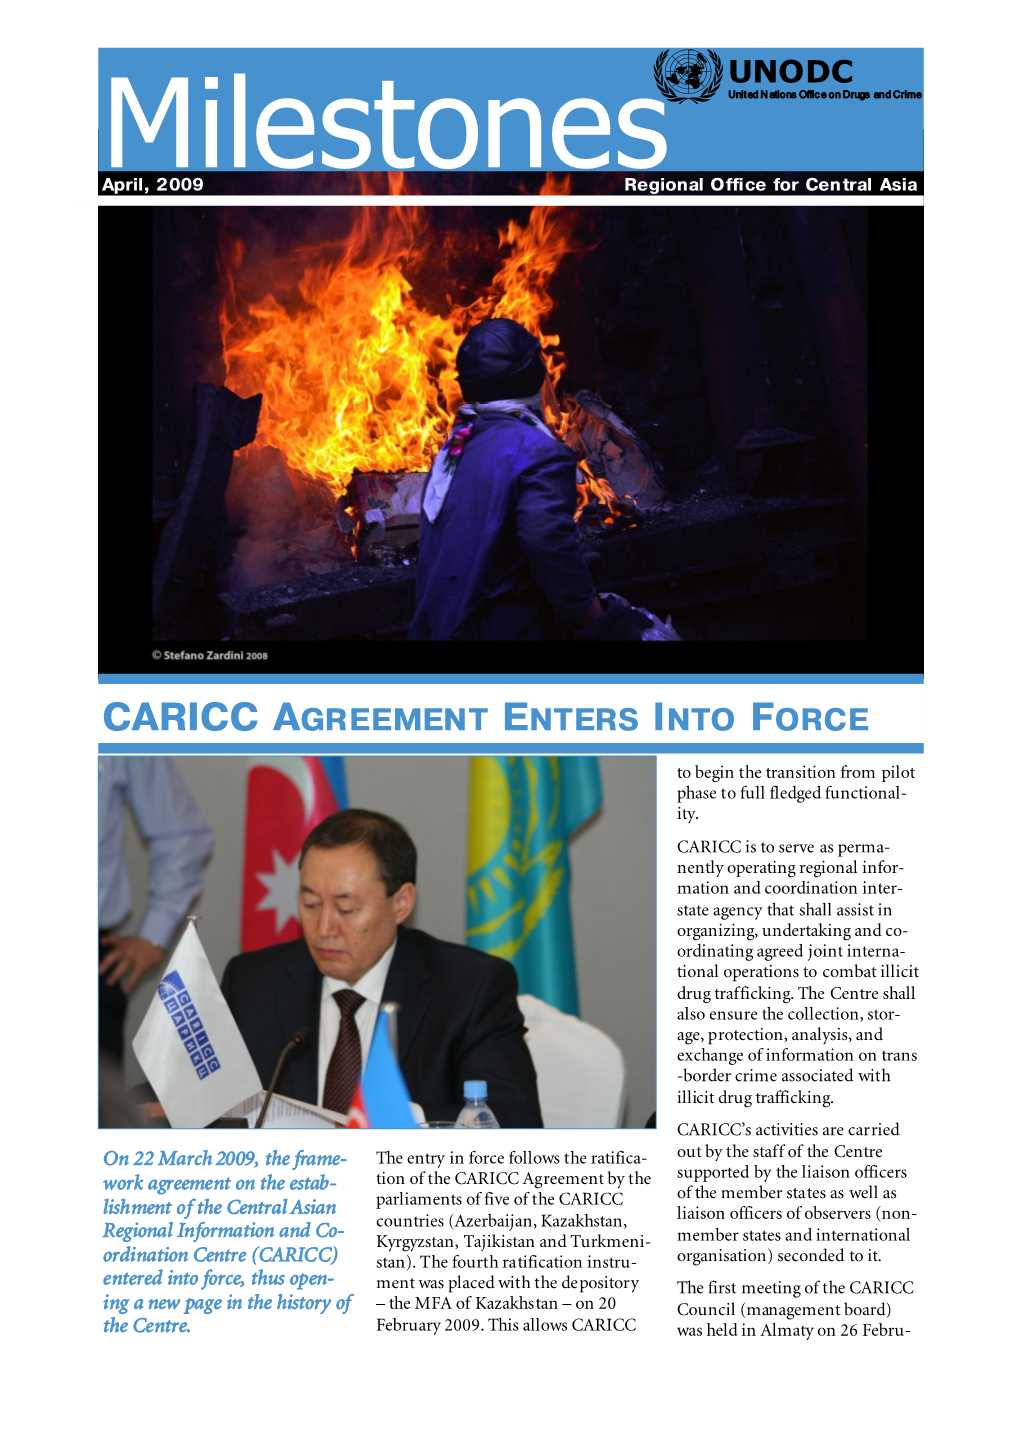 Caricc Agreement Enters Into Force